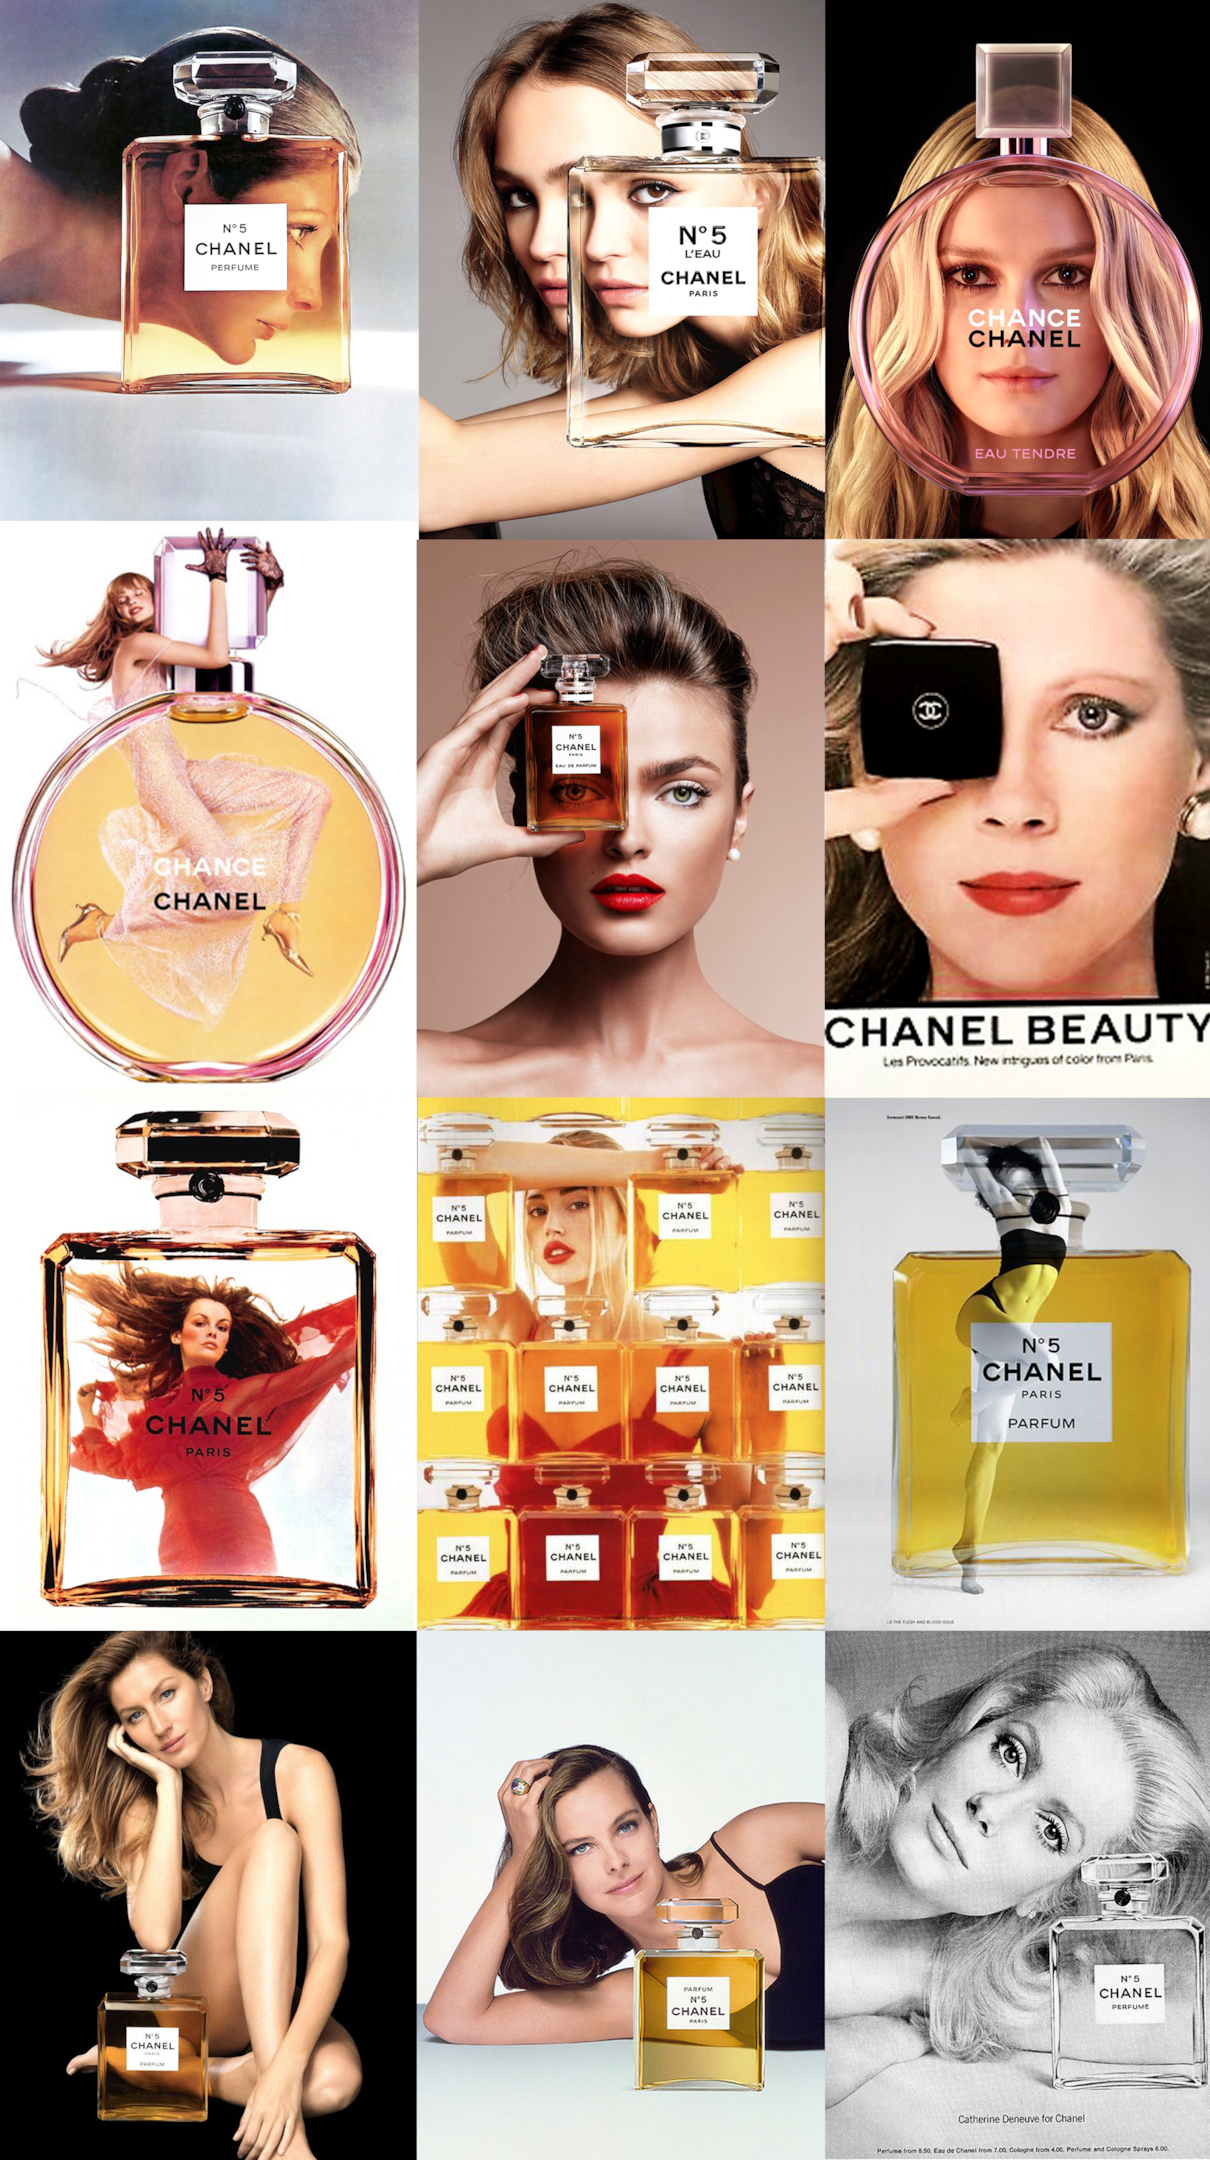 Chanel - Fragrances advertising through the years.